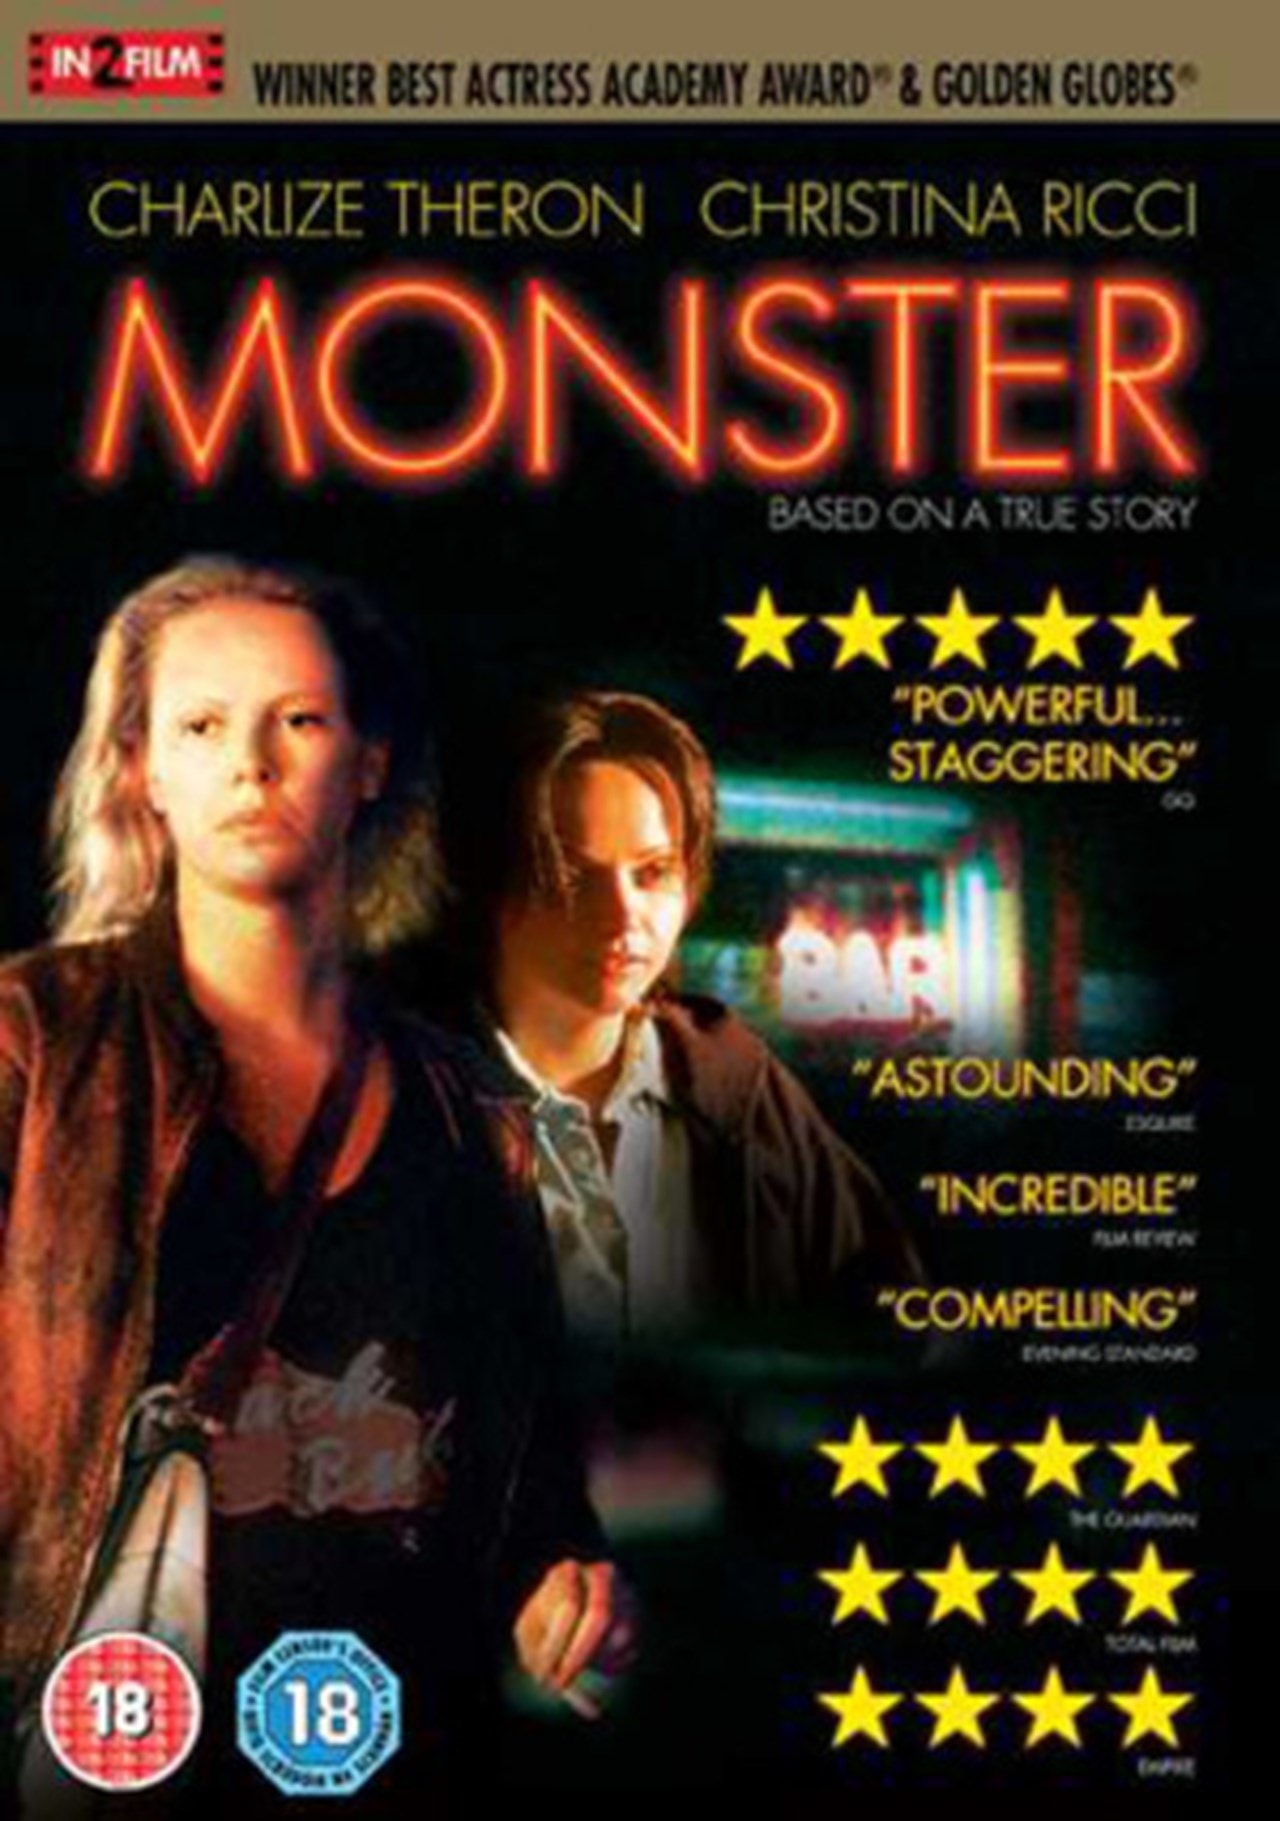 Monster Dvd Free Shipping Over 20 Hmv Store Charlize theron retweeted vanity fair. monster dvd free shipping over 20 hmv store